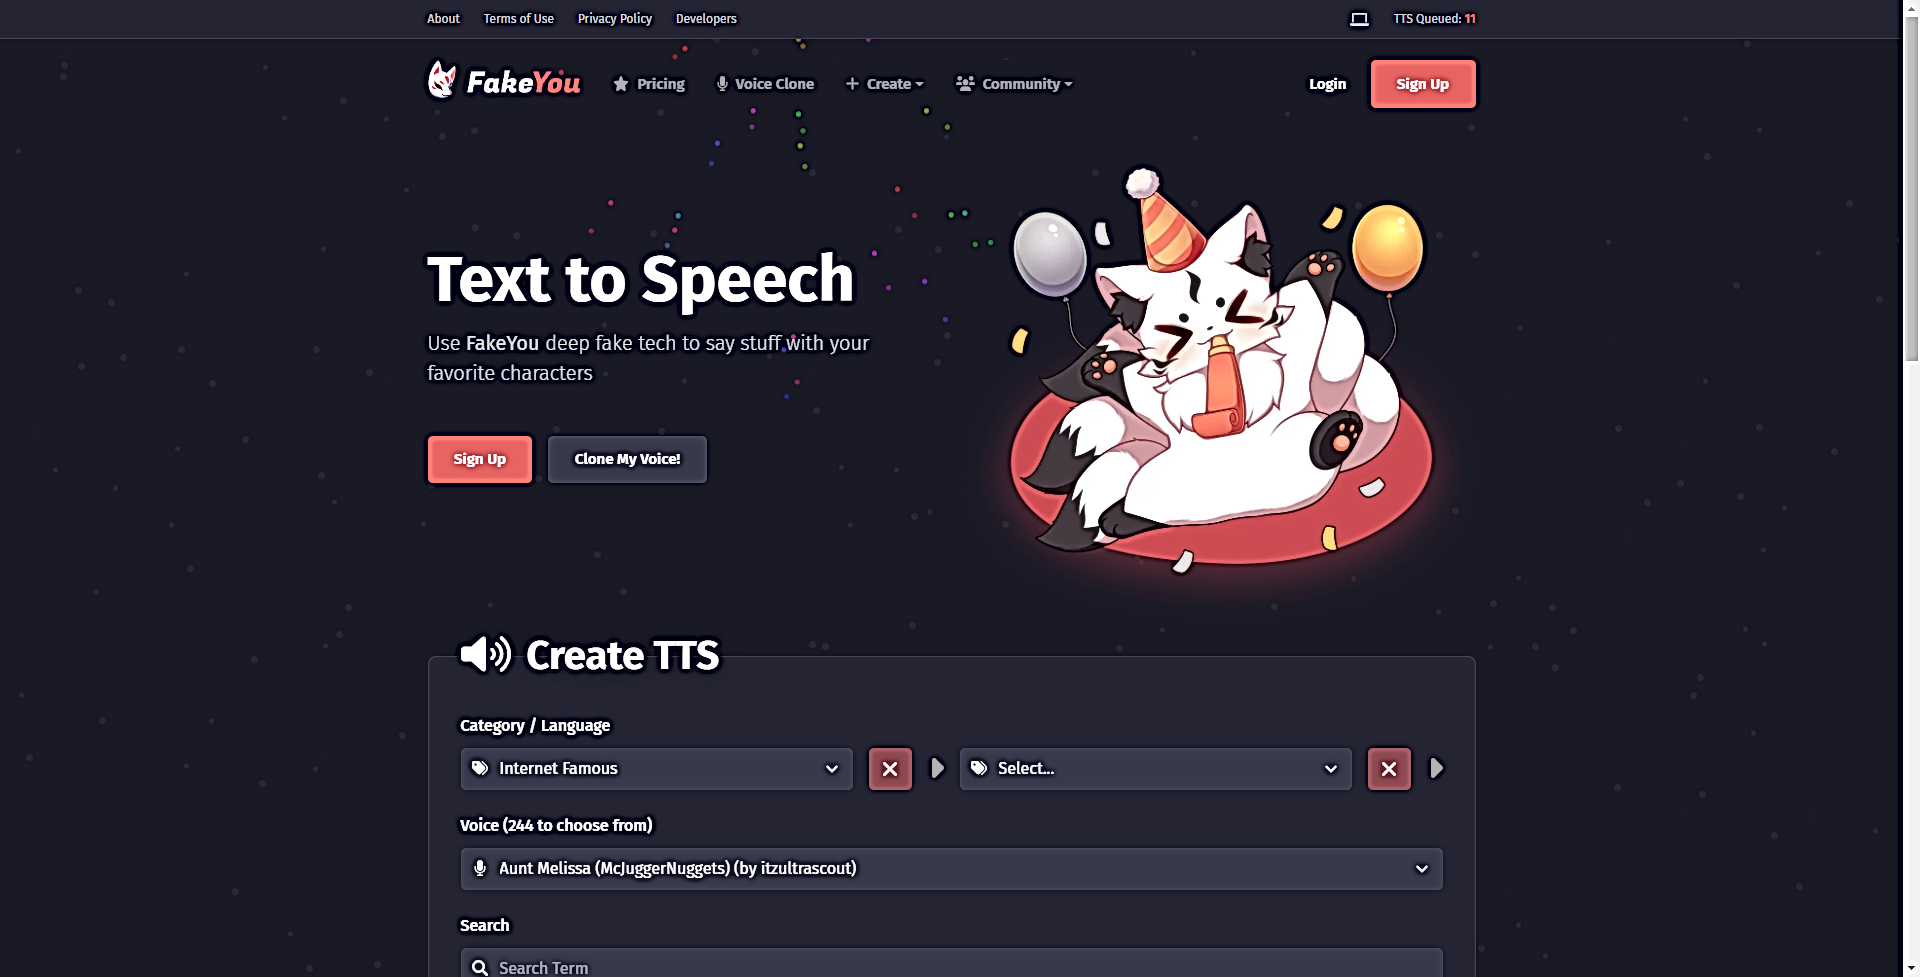 FakeYou featured